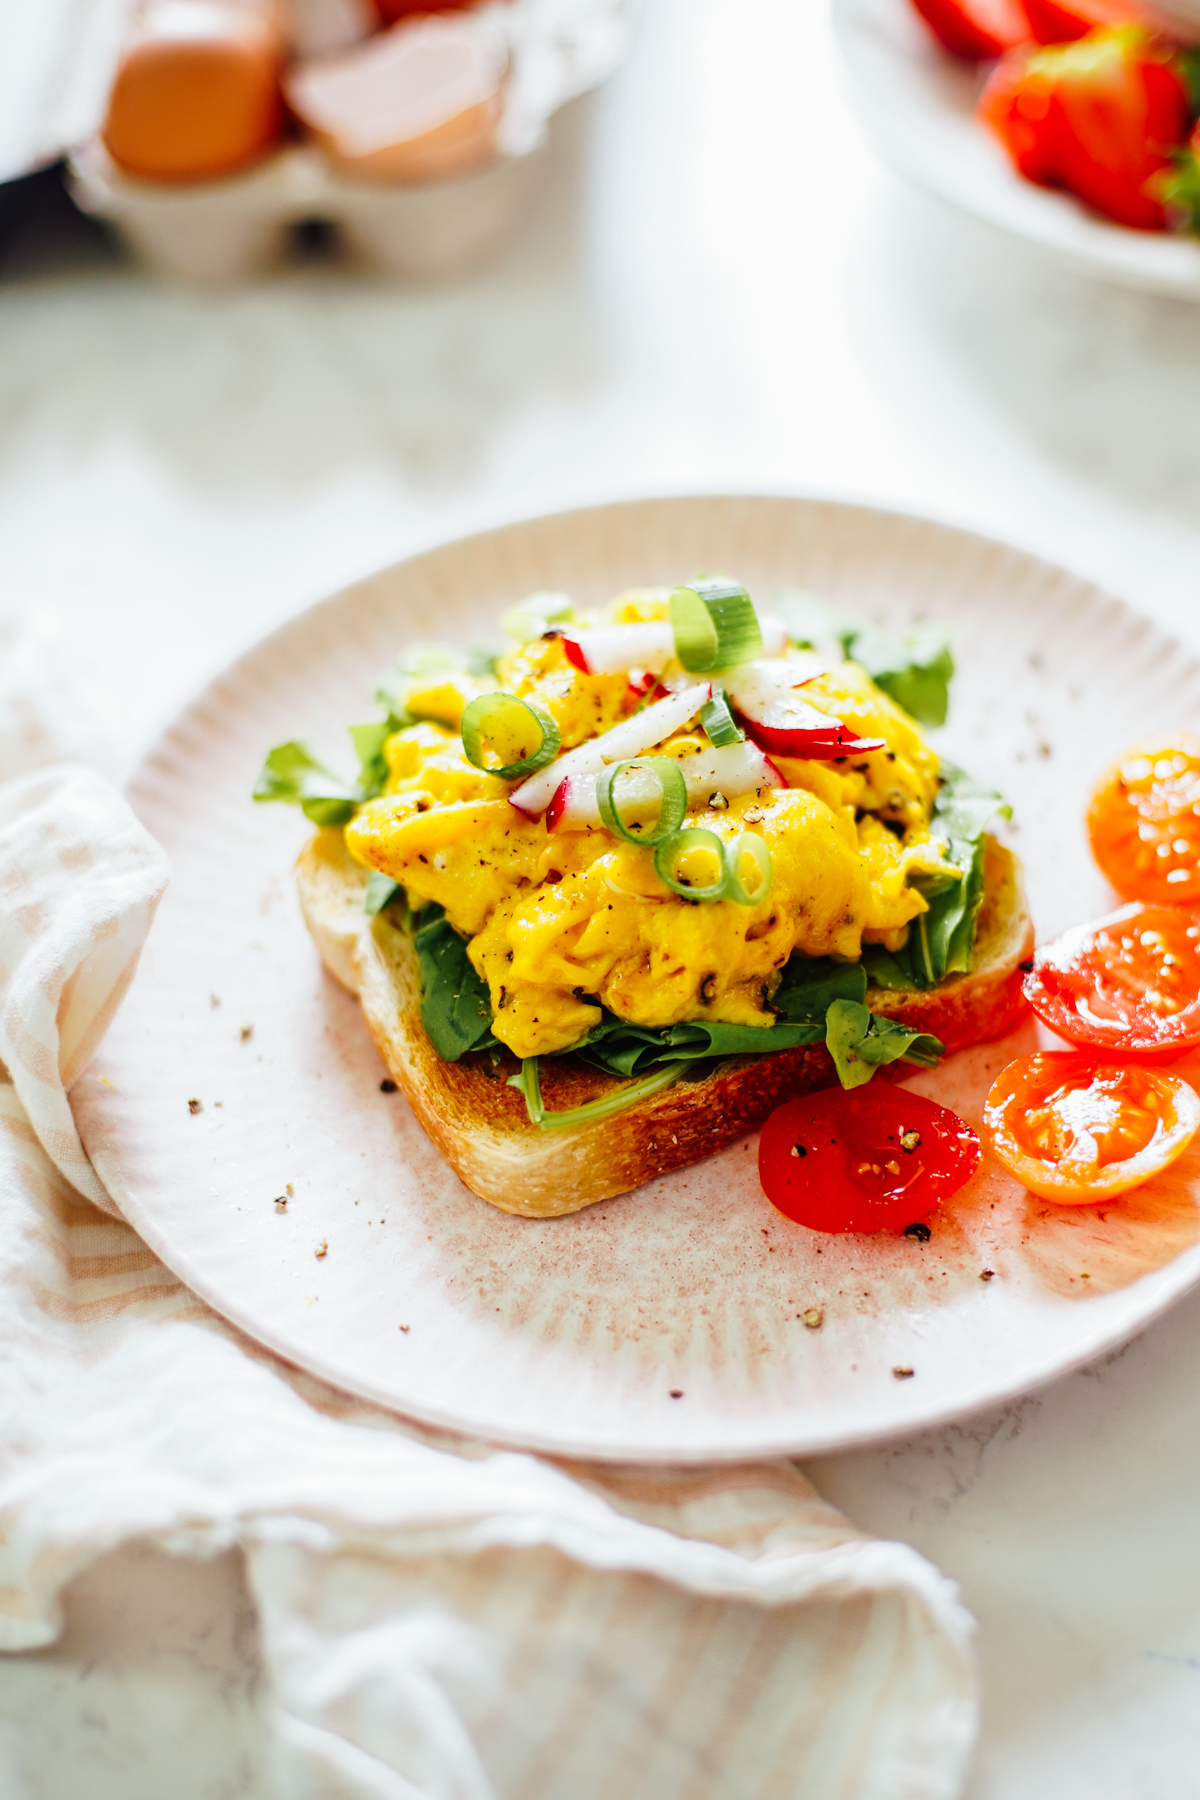 Breakfast sandwich: scrambled eggs on a slice of toast with arugula and radish slices on a pink plate.